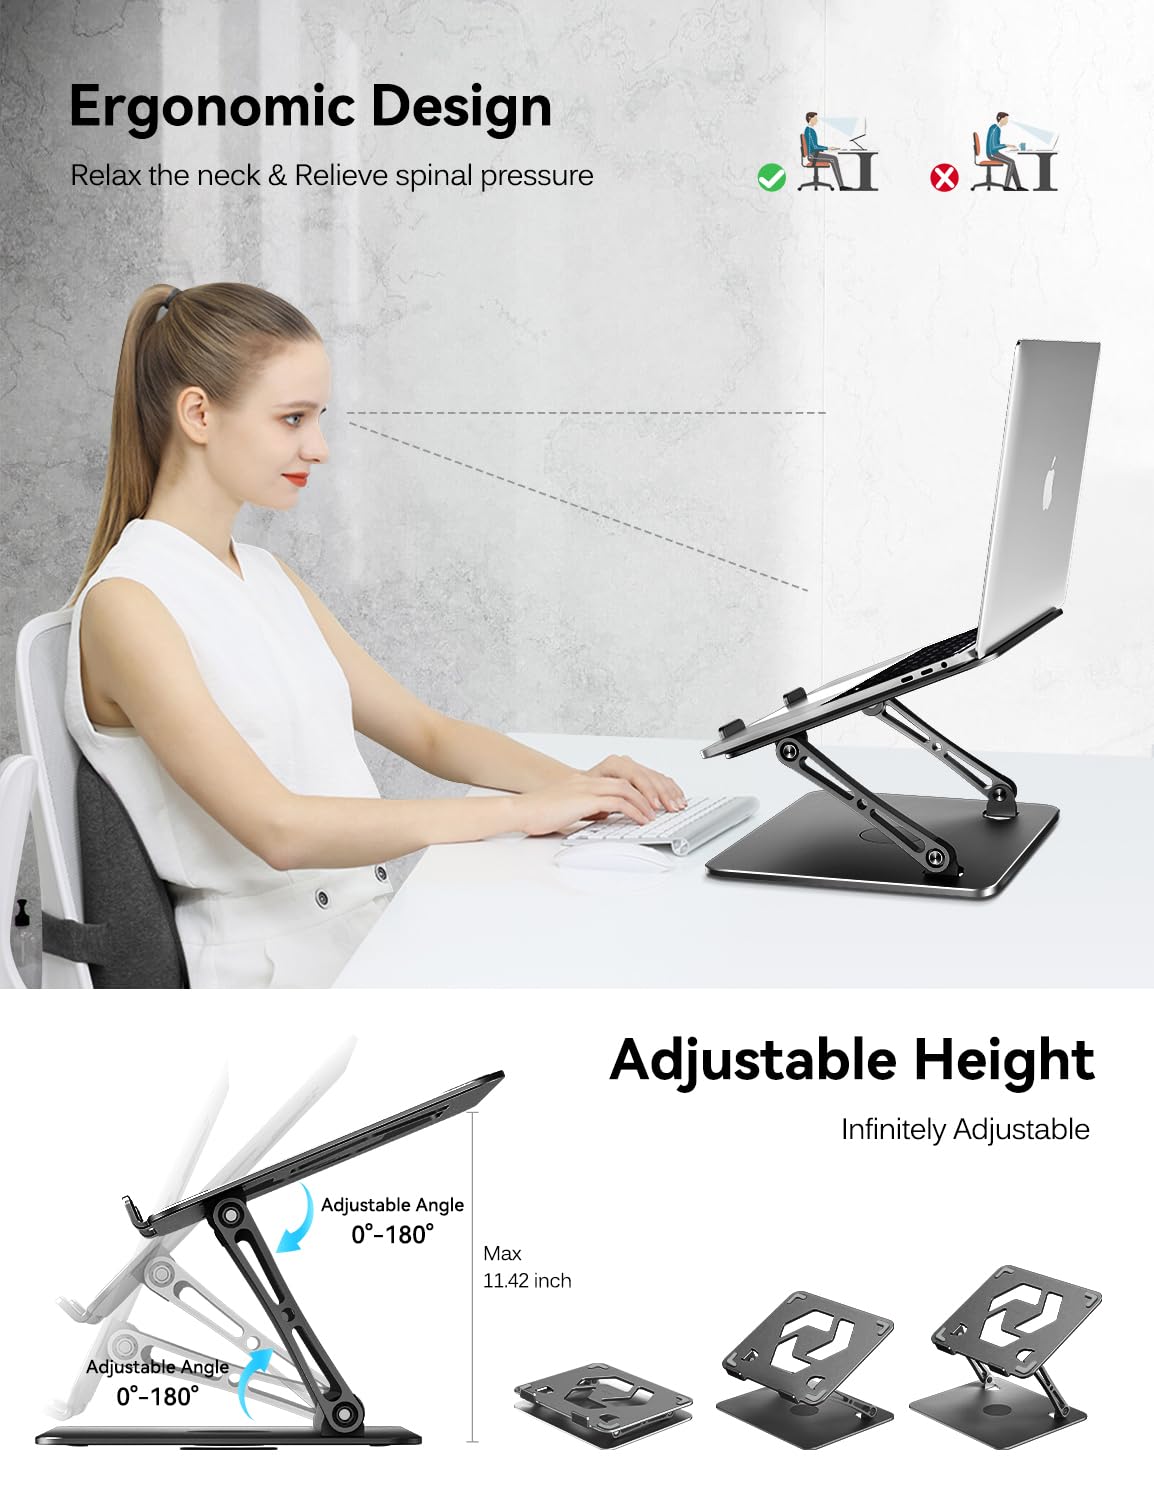 ivoler Laptop Stand for Desk, Adjustable Computer Stand with 360° Rotating Base, Foldable & Portable Laptop Riser, Stable Typing, Suitable for Collaborative Work, Fits Laptops up to 16 inches [Black]